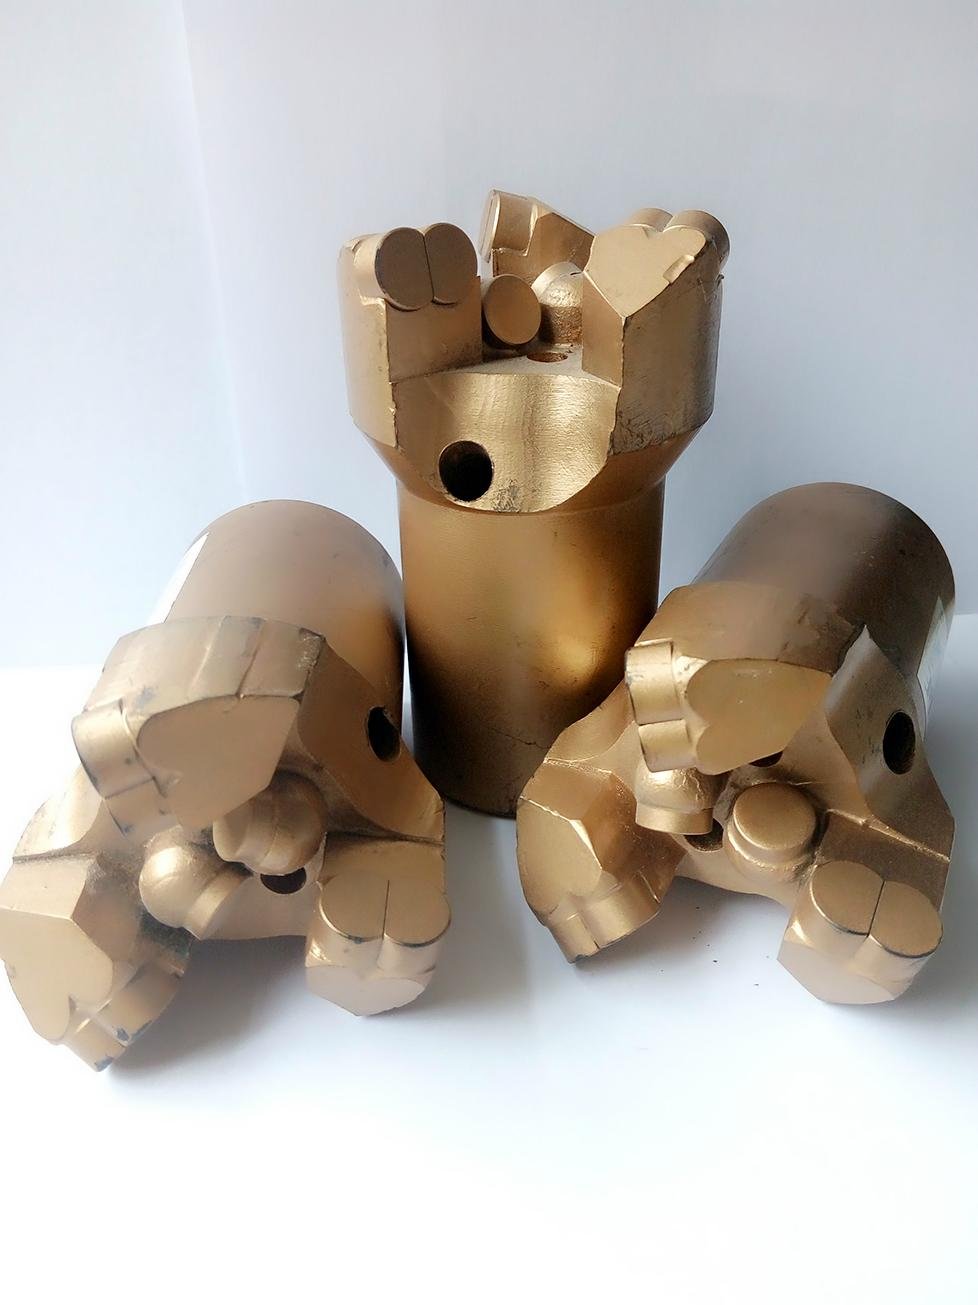 75mm PDC non core diamond bits for hole drilling 4